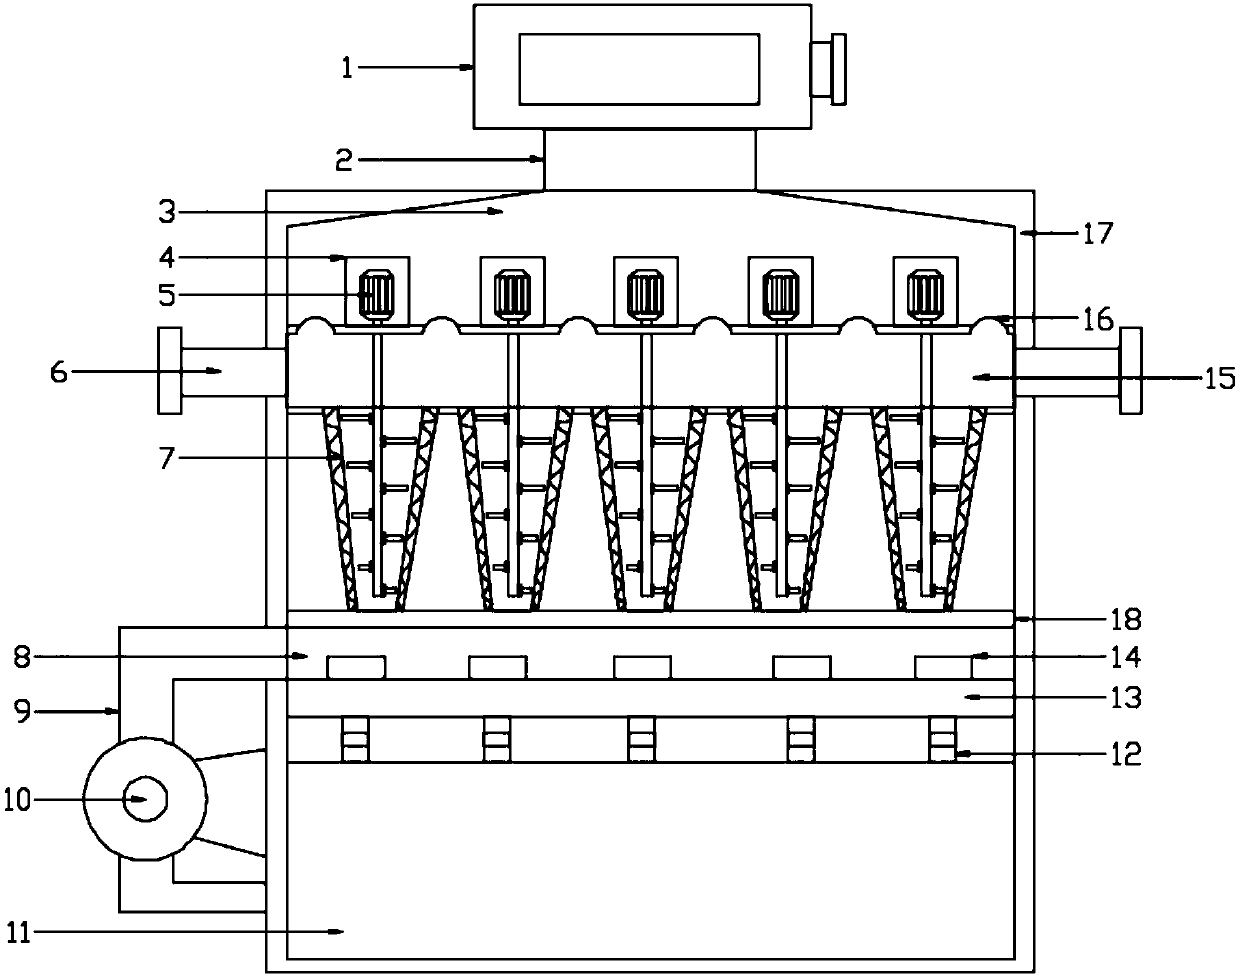 Distillation equipment for chemical production